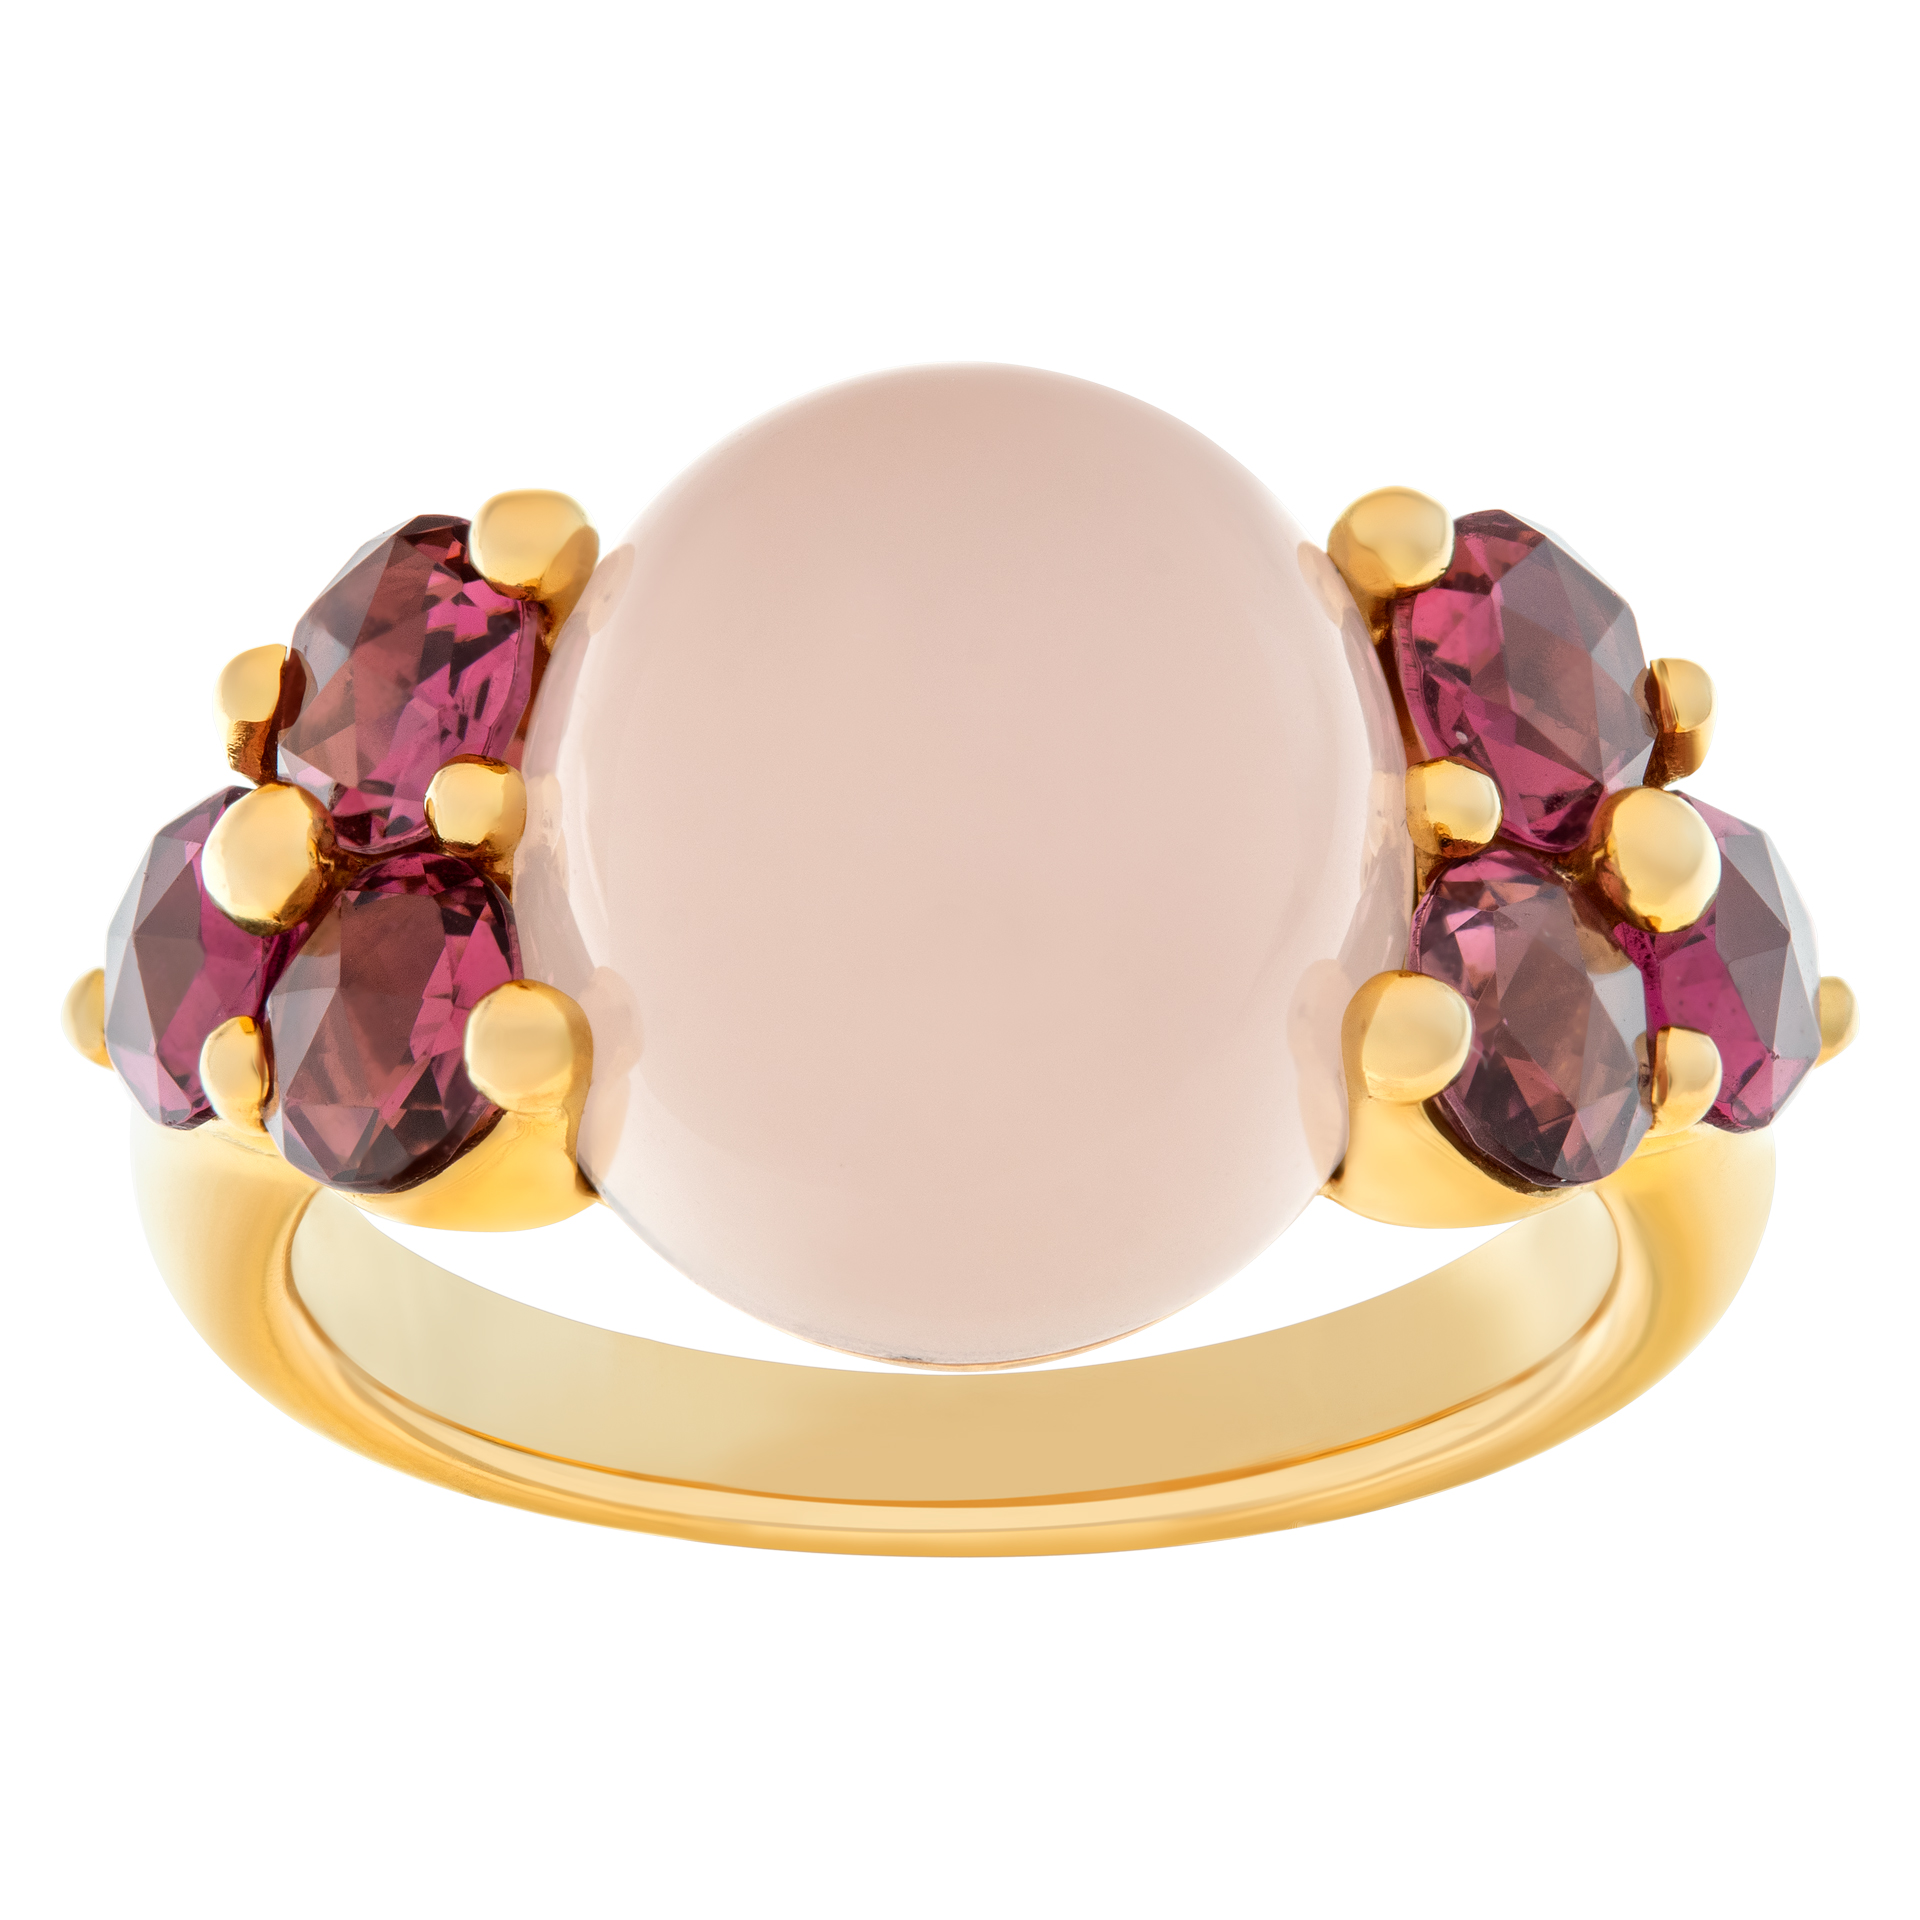 Pomellato Luna ring in 18k rose gold with cabochon rose quartz and side pink tourmaline